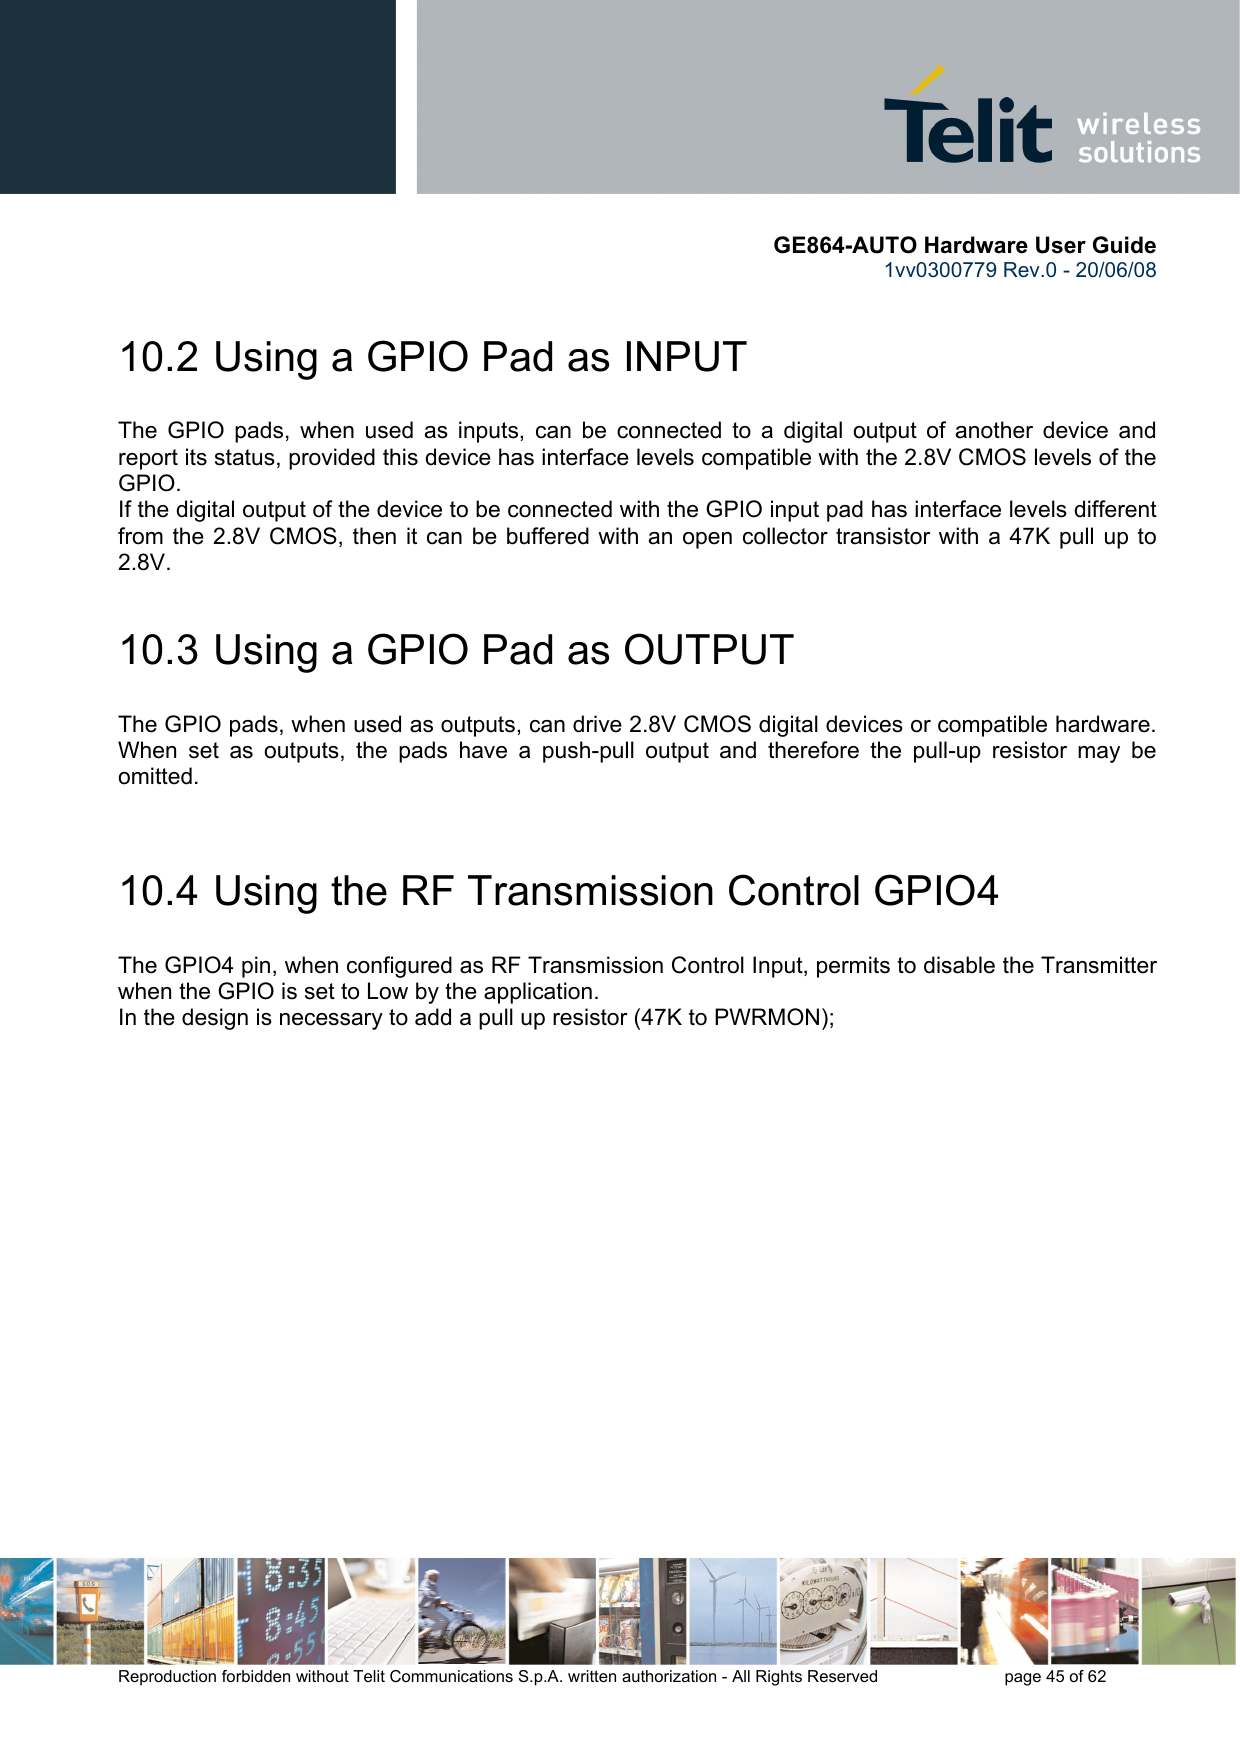       GE864-AUTO Hardware User Guide 1vv0300779 Rev.0 - 20/06/08      Reproduction forbidden without Telit Communications S.p.A. written authorization - All Rights Reserved    page 45 of 62  10.2  Using a GPIO Pad as INPUT The GPIO pads, when used as inputs, can be connected to a digital output of another device and report its status, provided this device has interface levels compatible with the 2.8V CMOS levels of the GPIO.  If the digital output of the device to be connected with the GPIO input pad has interface levels different from the 2.8V CMOS, then it can be buffered with an open collector transistor with a 47K pull up to 2.8V. 10.3  Using a GPIO Pad as OUTPUT The GPIO pads, when used as outputs, can drive 2.8V CMOS digital devices or compatible hardware. When set as outputs, the pads have a push-pull output and therefore the pull-up resistor may be omitted.  10.4  Using the RF Transmission Control GPIO4 The GPIO4 pin, when configured as RF Transmission Control Input, permits to disable the Transmitter when the GPIO is set to Low by the application. In the design is necessary to add a pull up resistor (47K to PWRMON);     